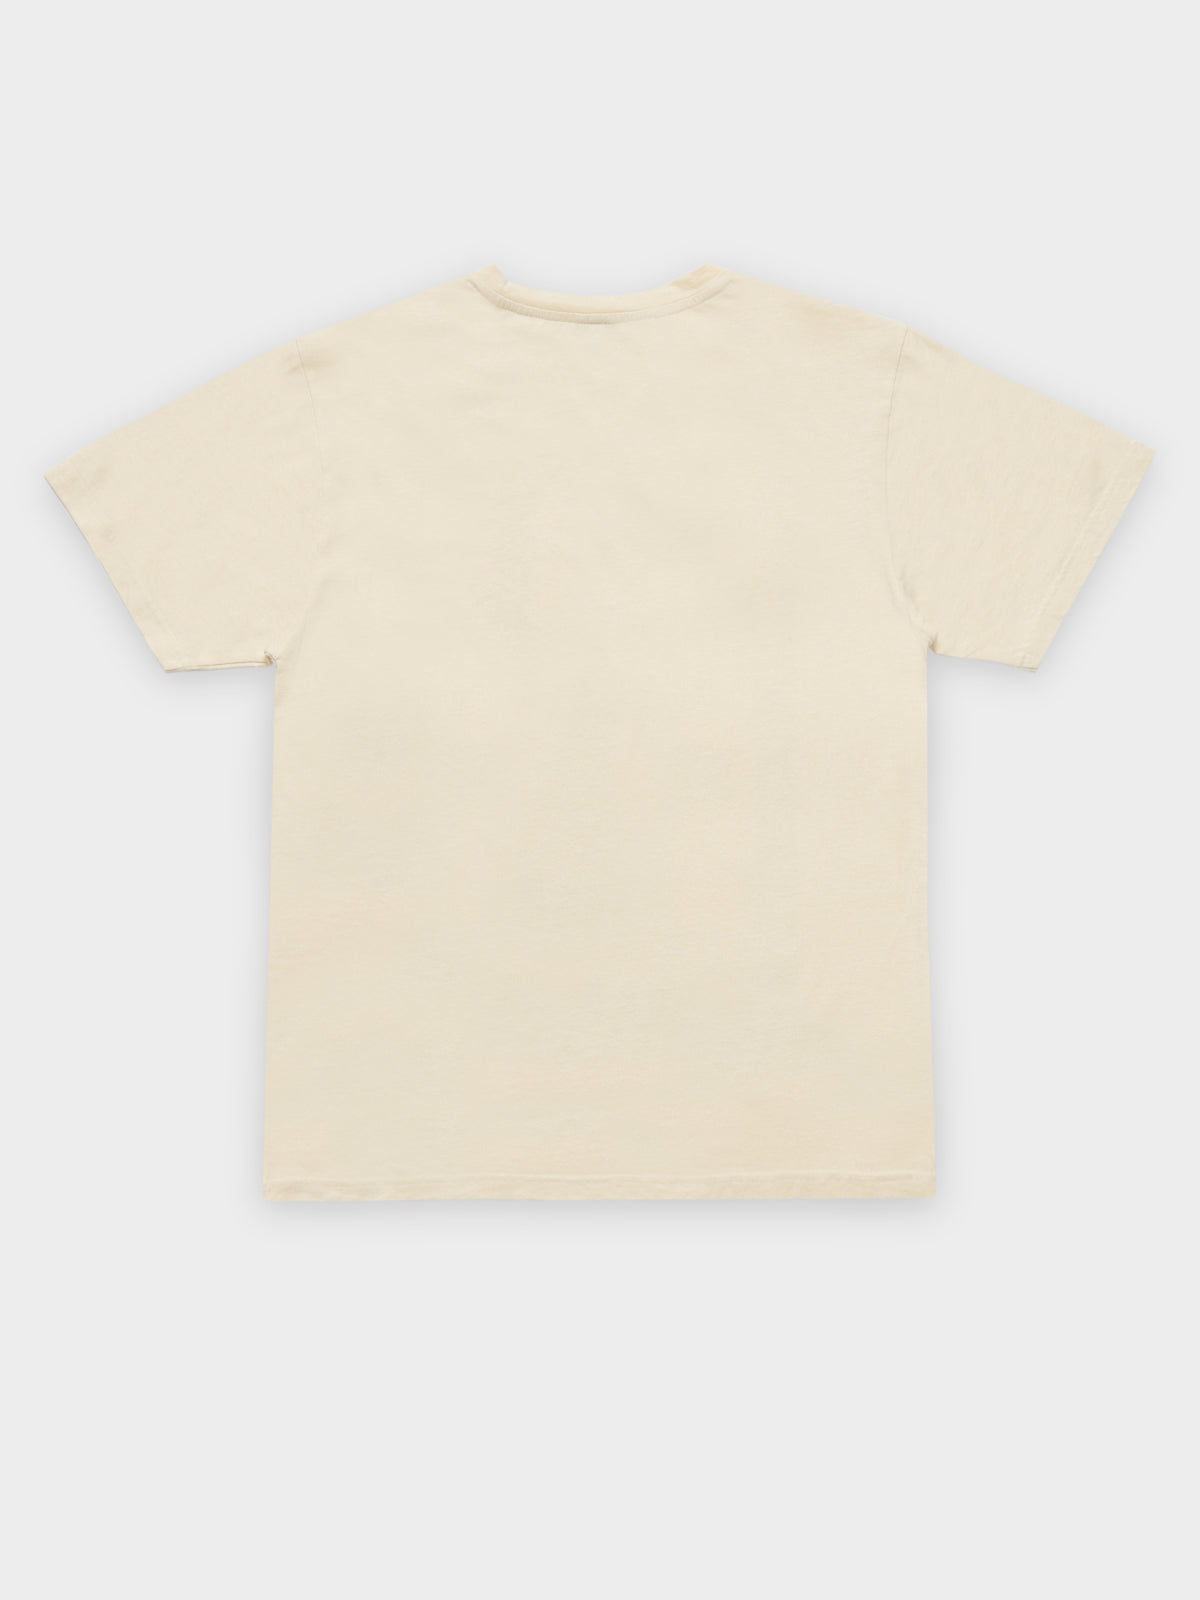 Destroyer T-Shirt in Ivory